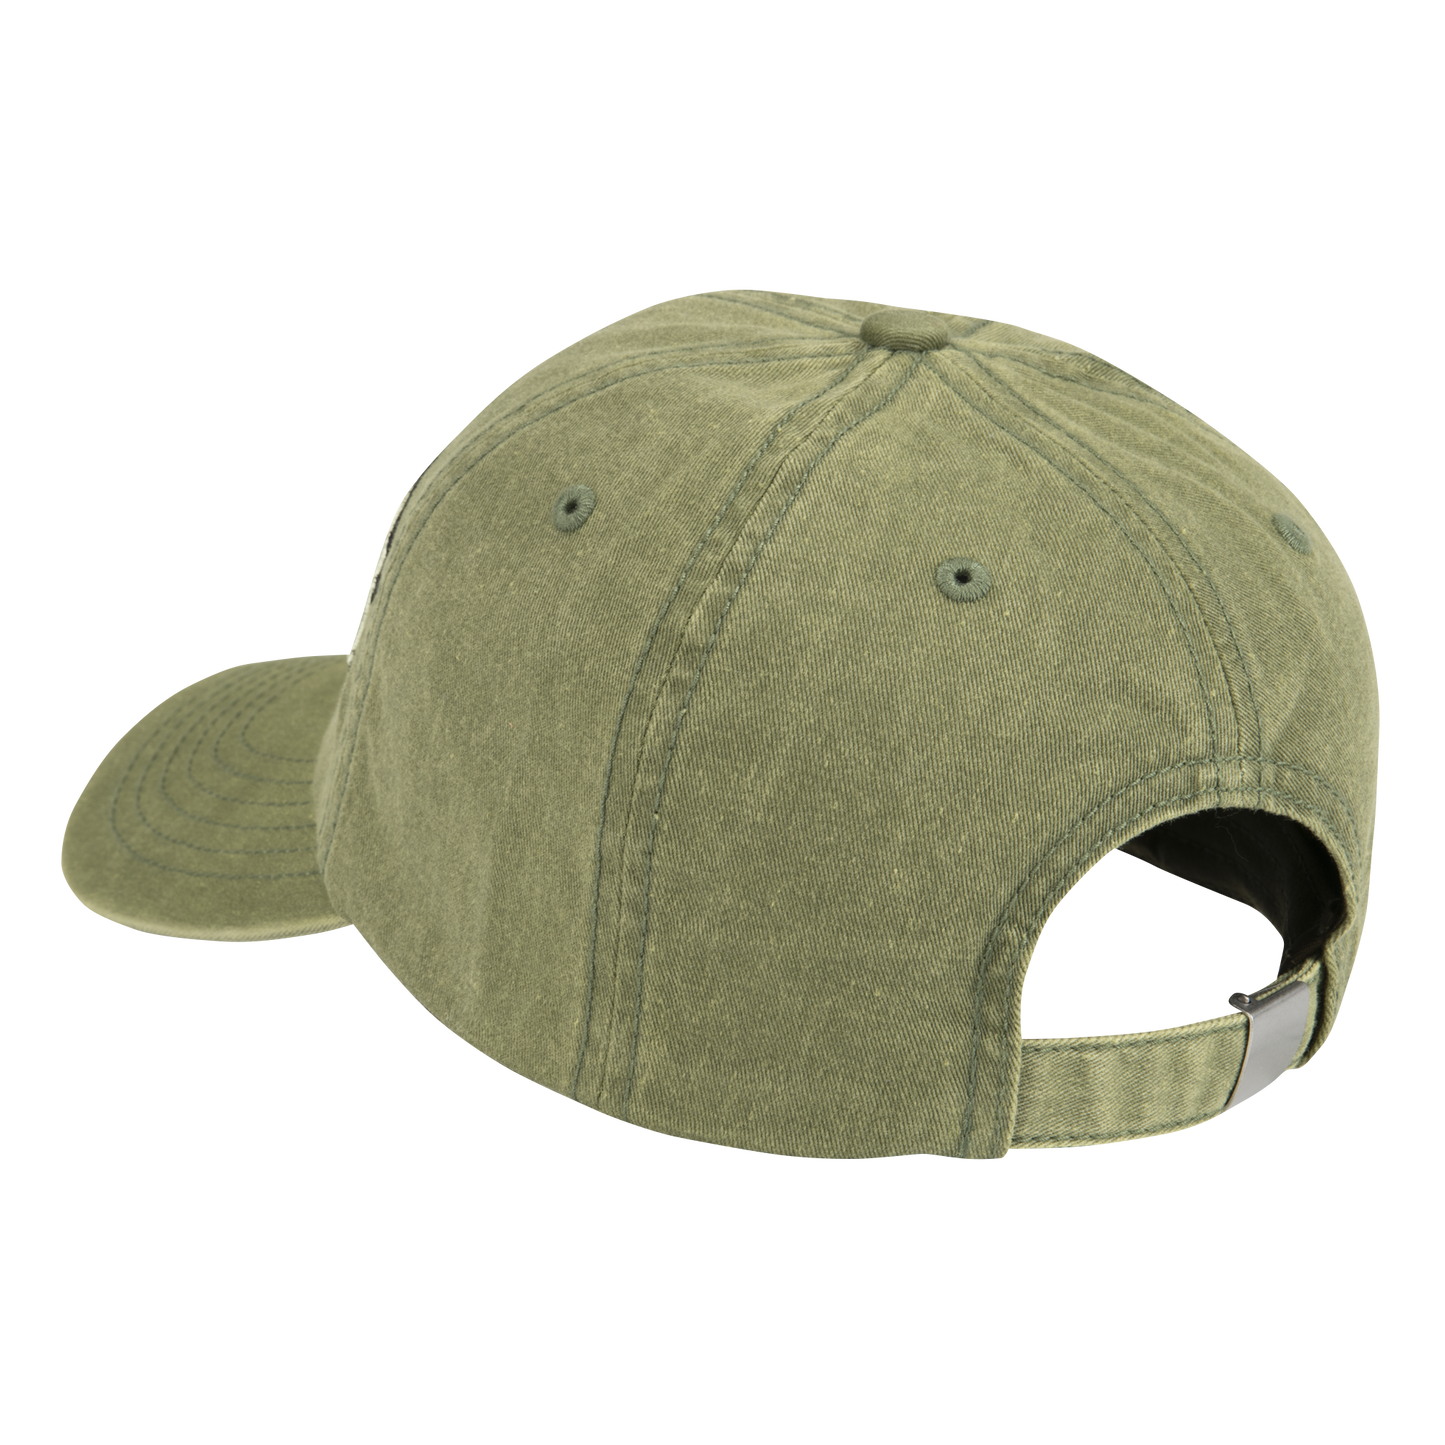 Olive Green Air Force Wings puff 3D Logo Cap